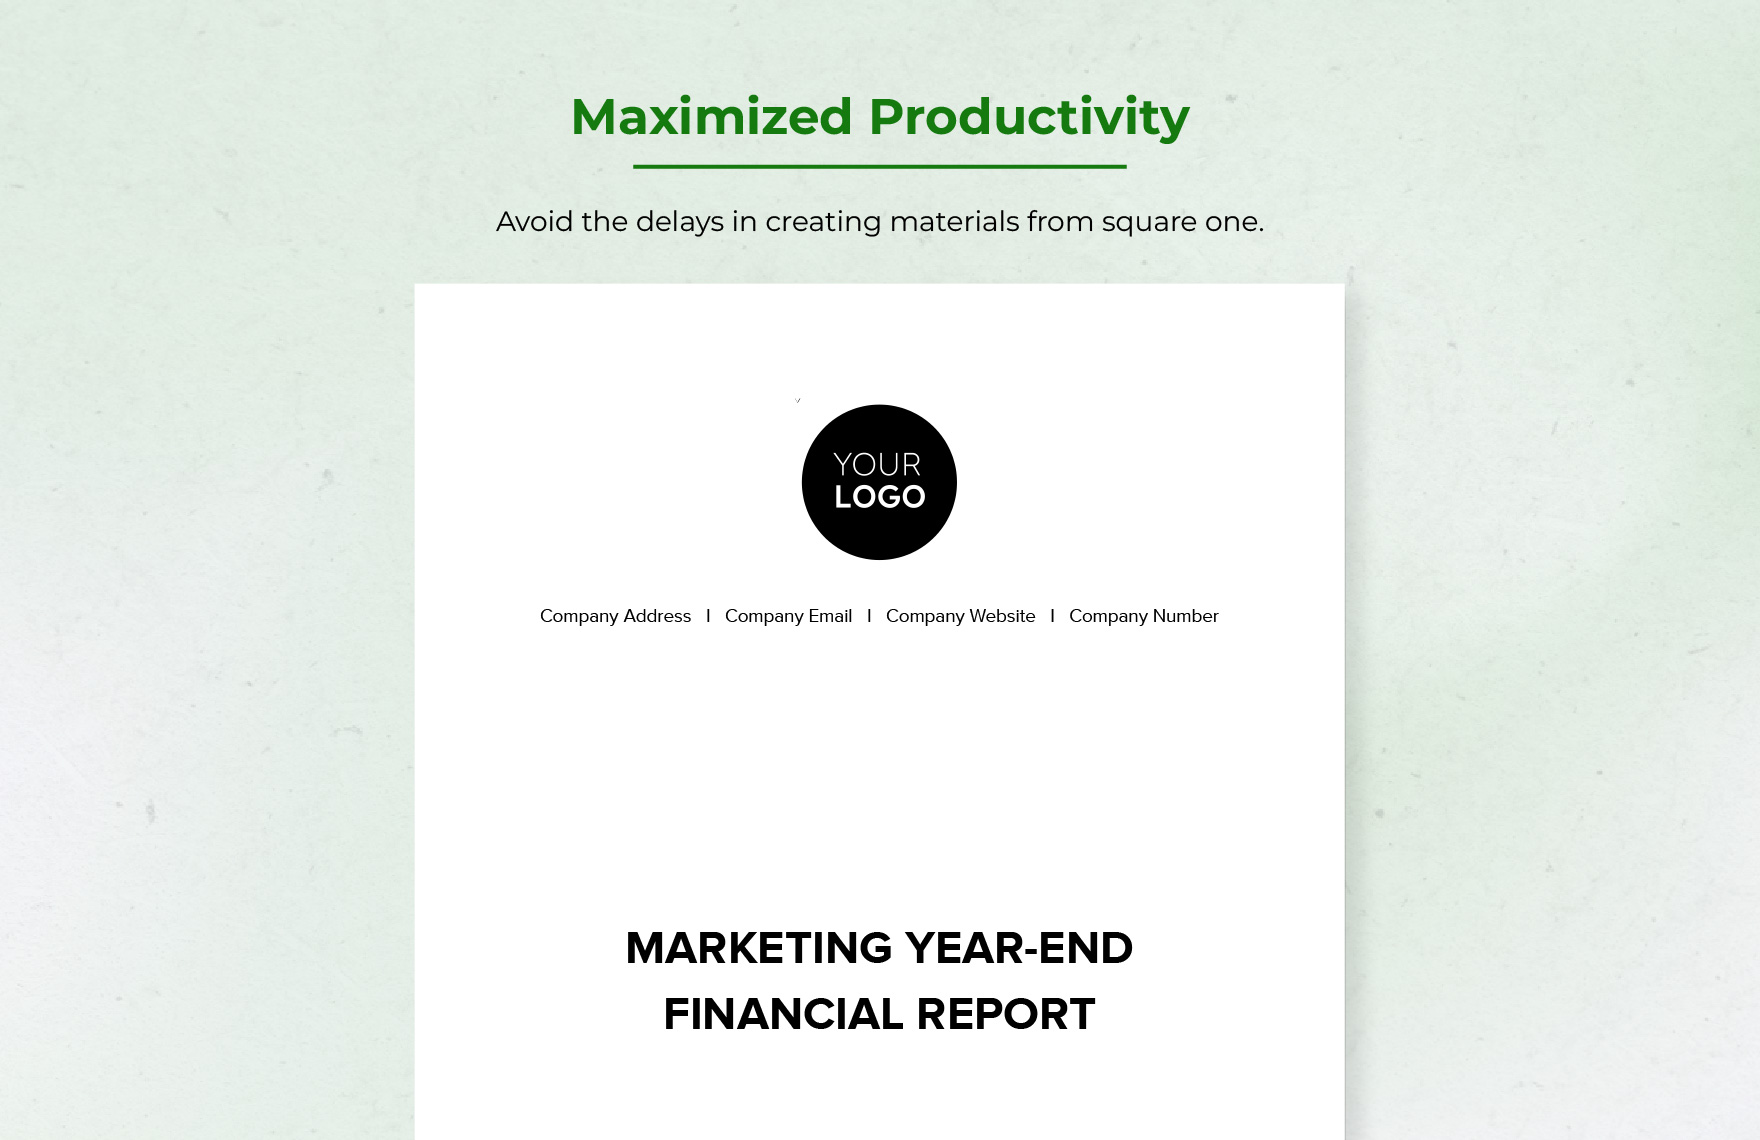 Marketing Year-end Financial Report Template